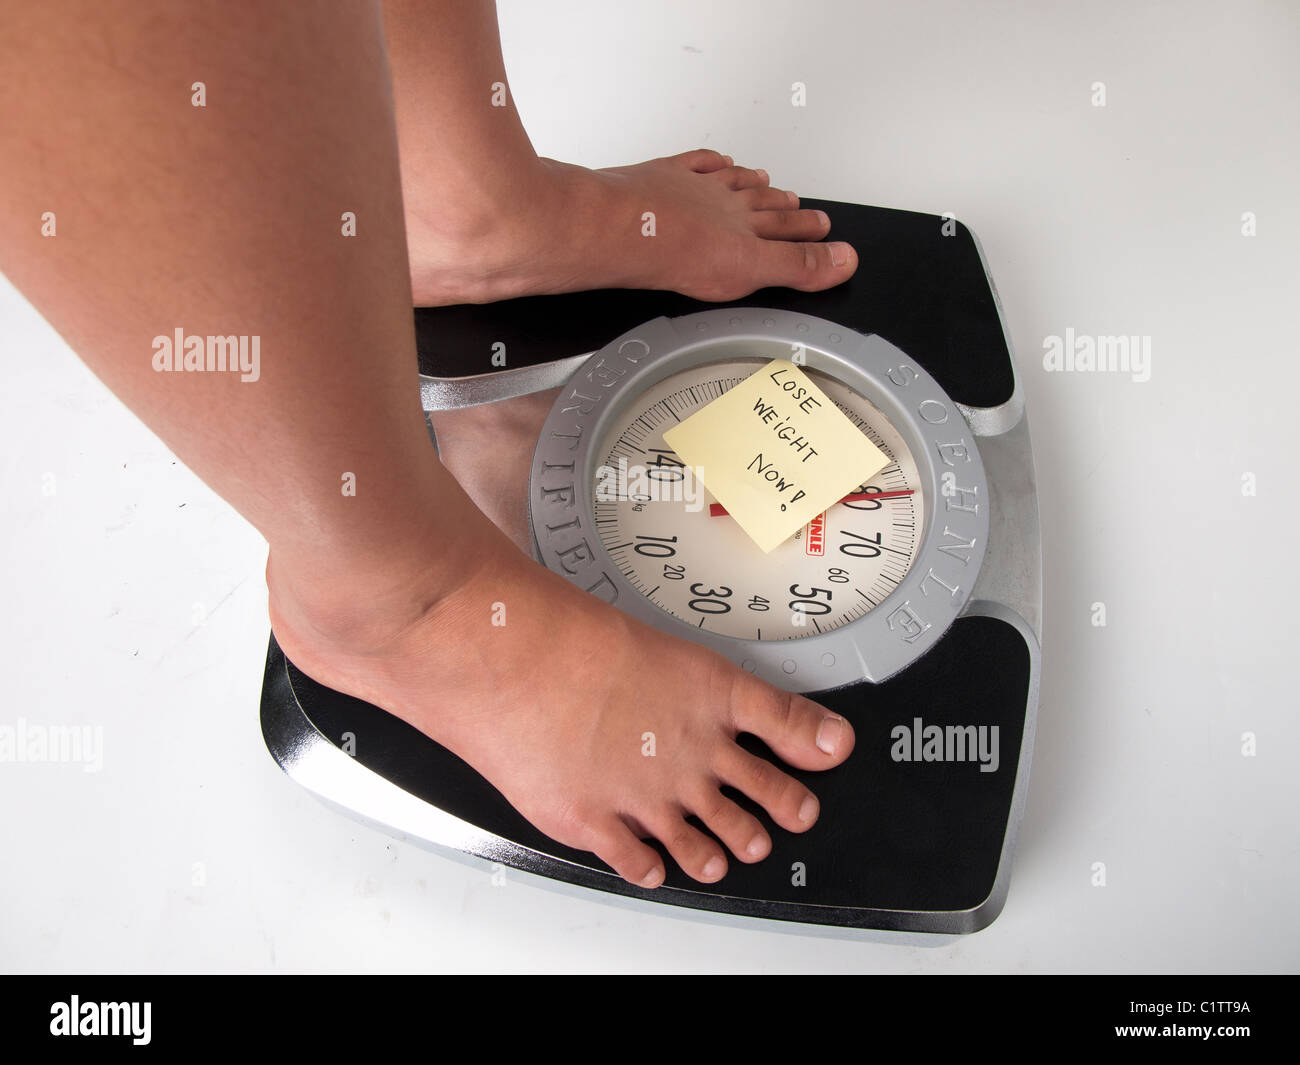 https://c8.alamy.com/comp/C1TT9A/a-woman-standing-on-a-weighing-scale-in-white-background-with-a-lose-C1TT9A.jpg